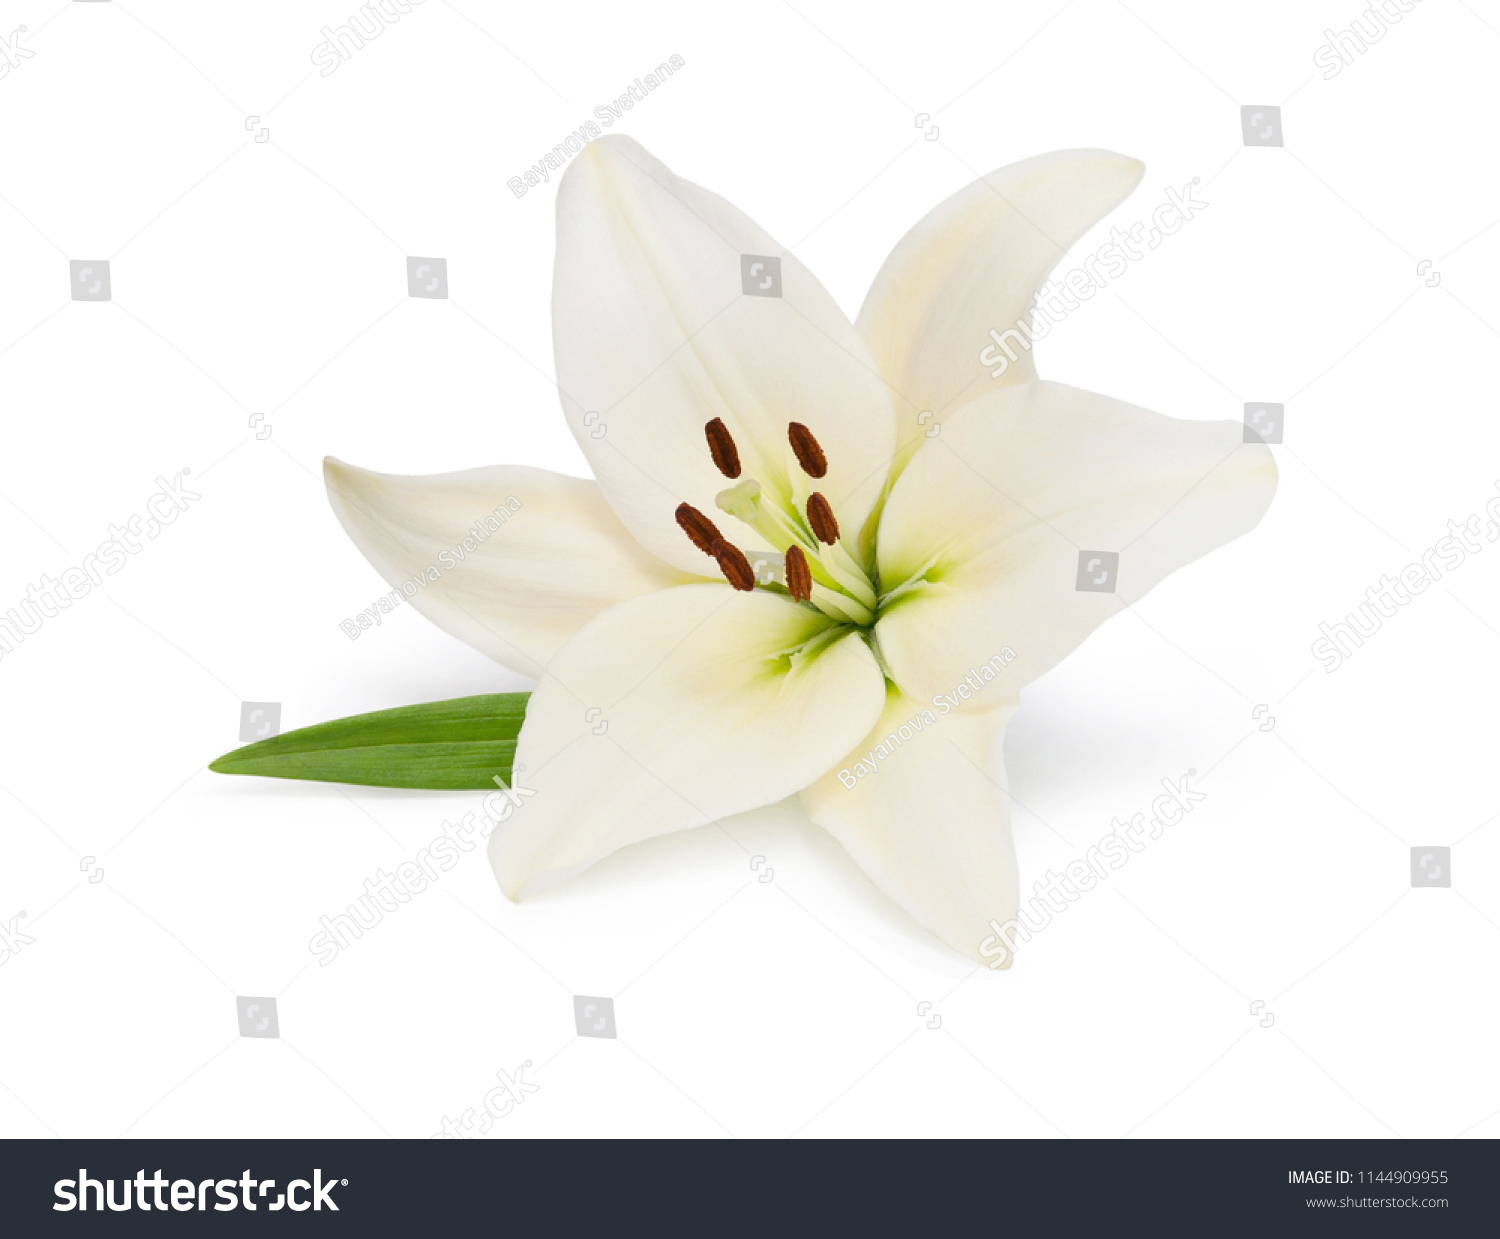 Beautifult lily flower isolated on white background. Saving clipping paths. #1144909955